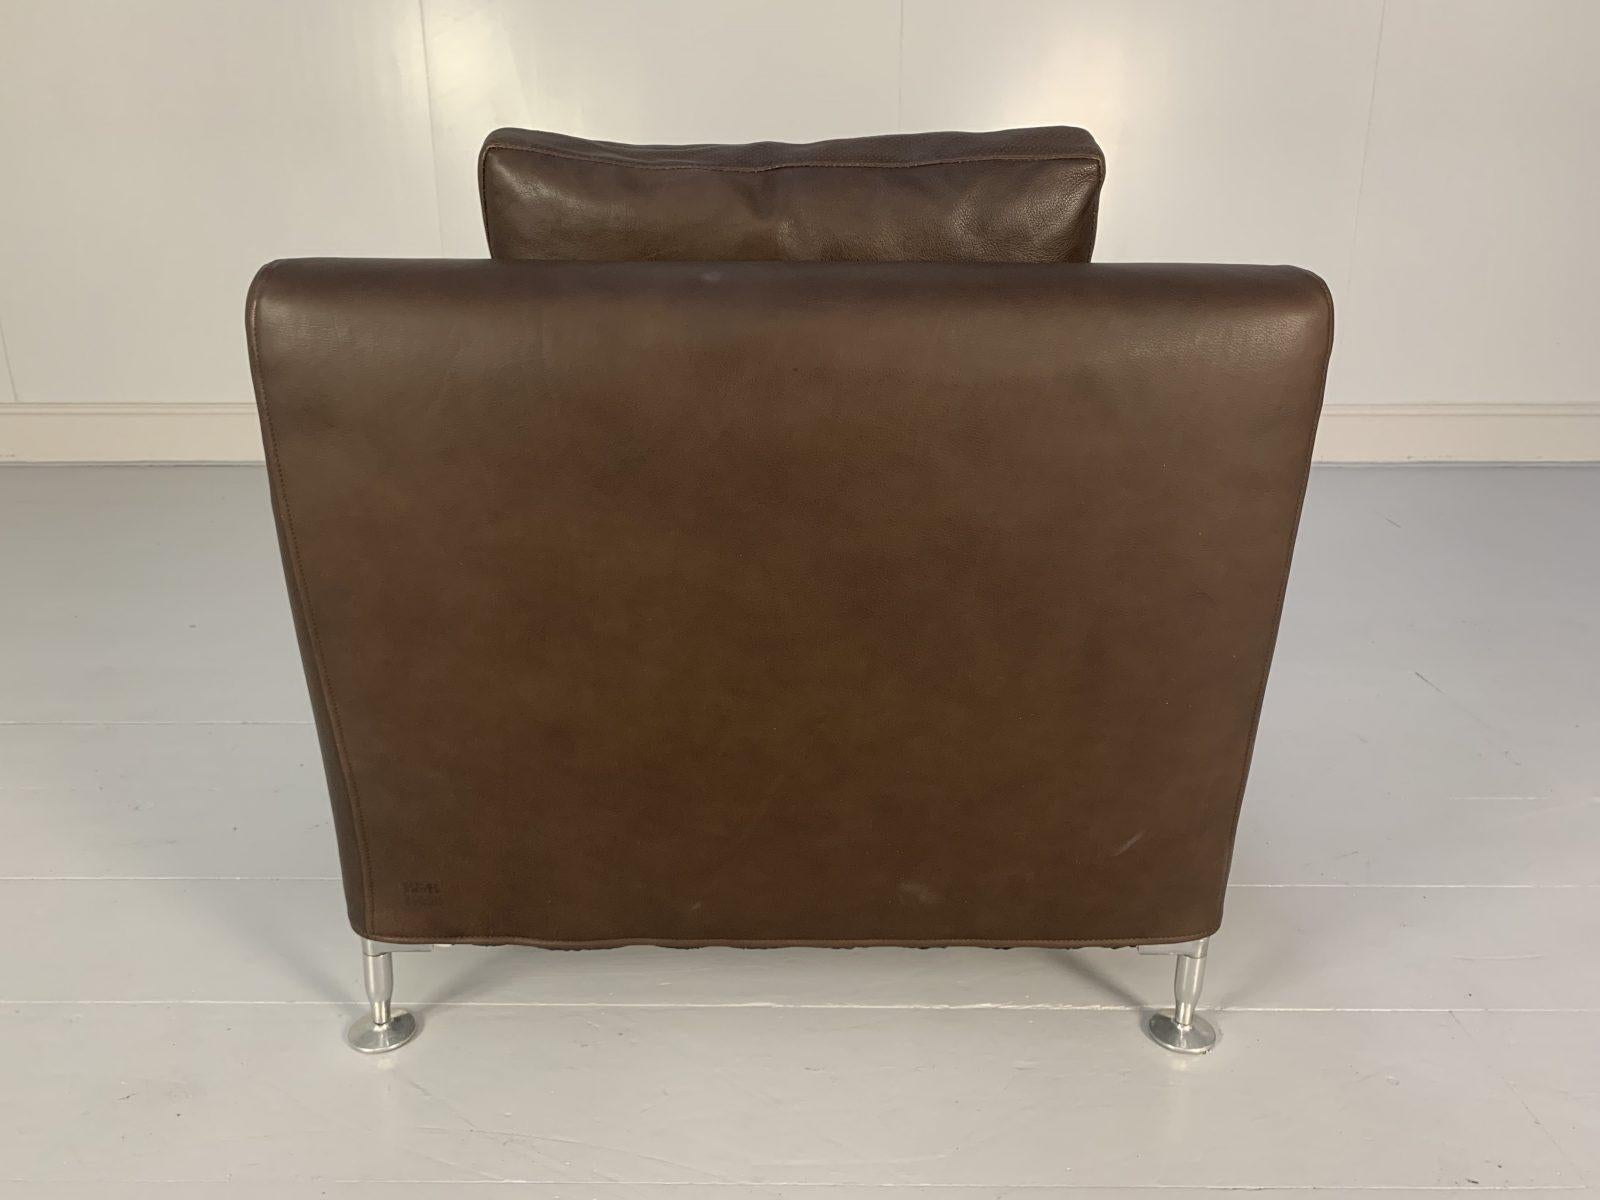 Pair of B&B Italia “Harry H85” Armchairs in Brown “Gamma” Leather For Sale 4